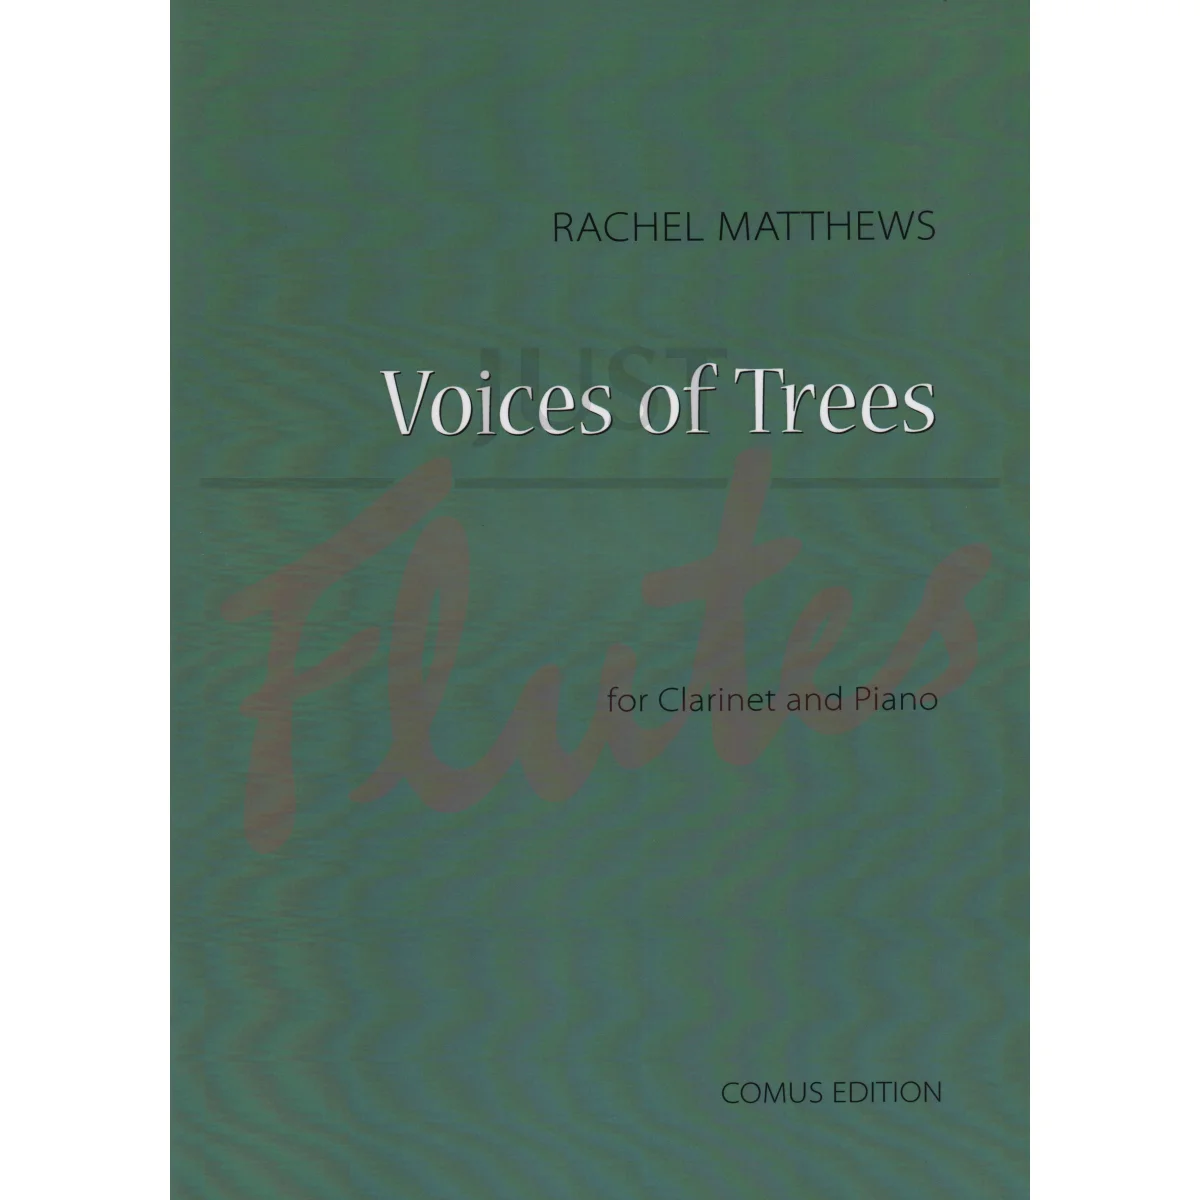 Voices of Trees for Clarinet and Piano